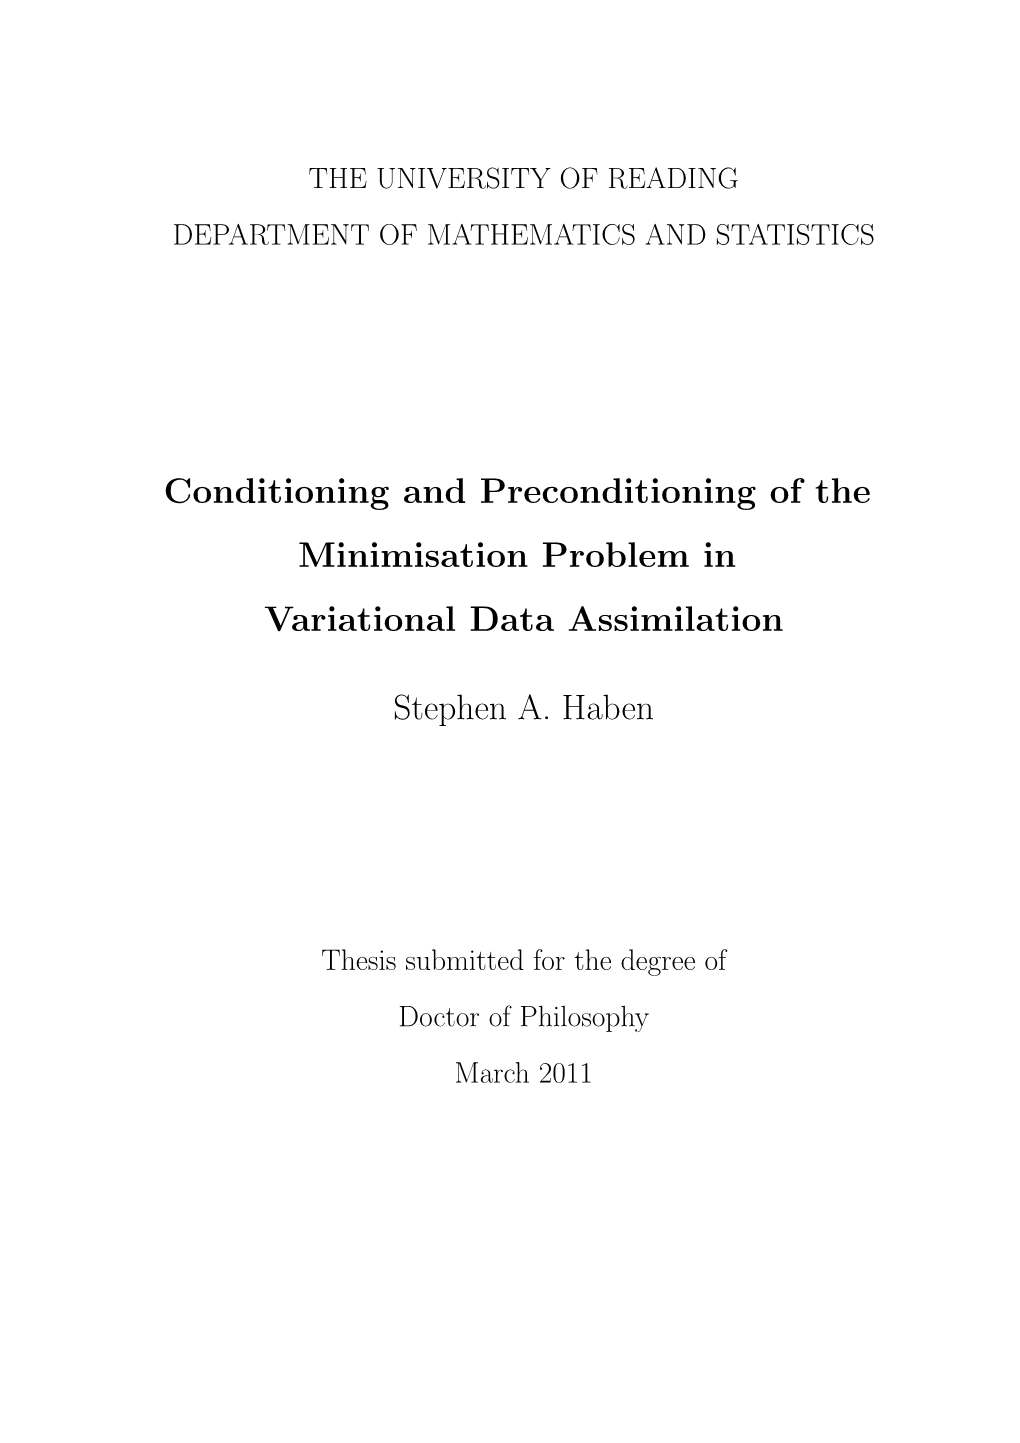 Conditioning and Preconditioning of the Minimisation Problem in Variational Data Assimilation Stephen A. Haben